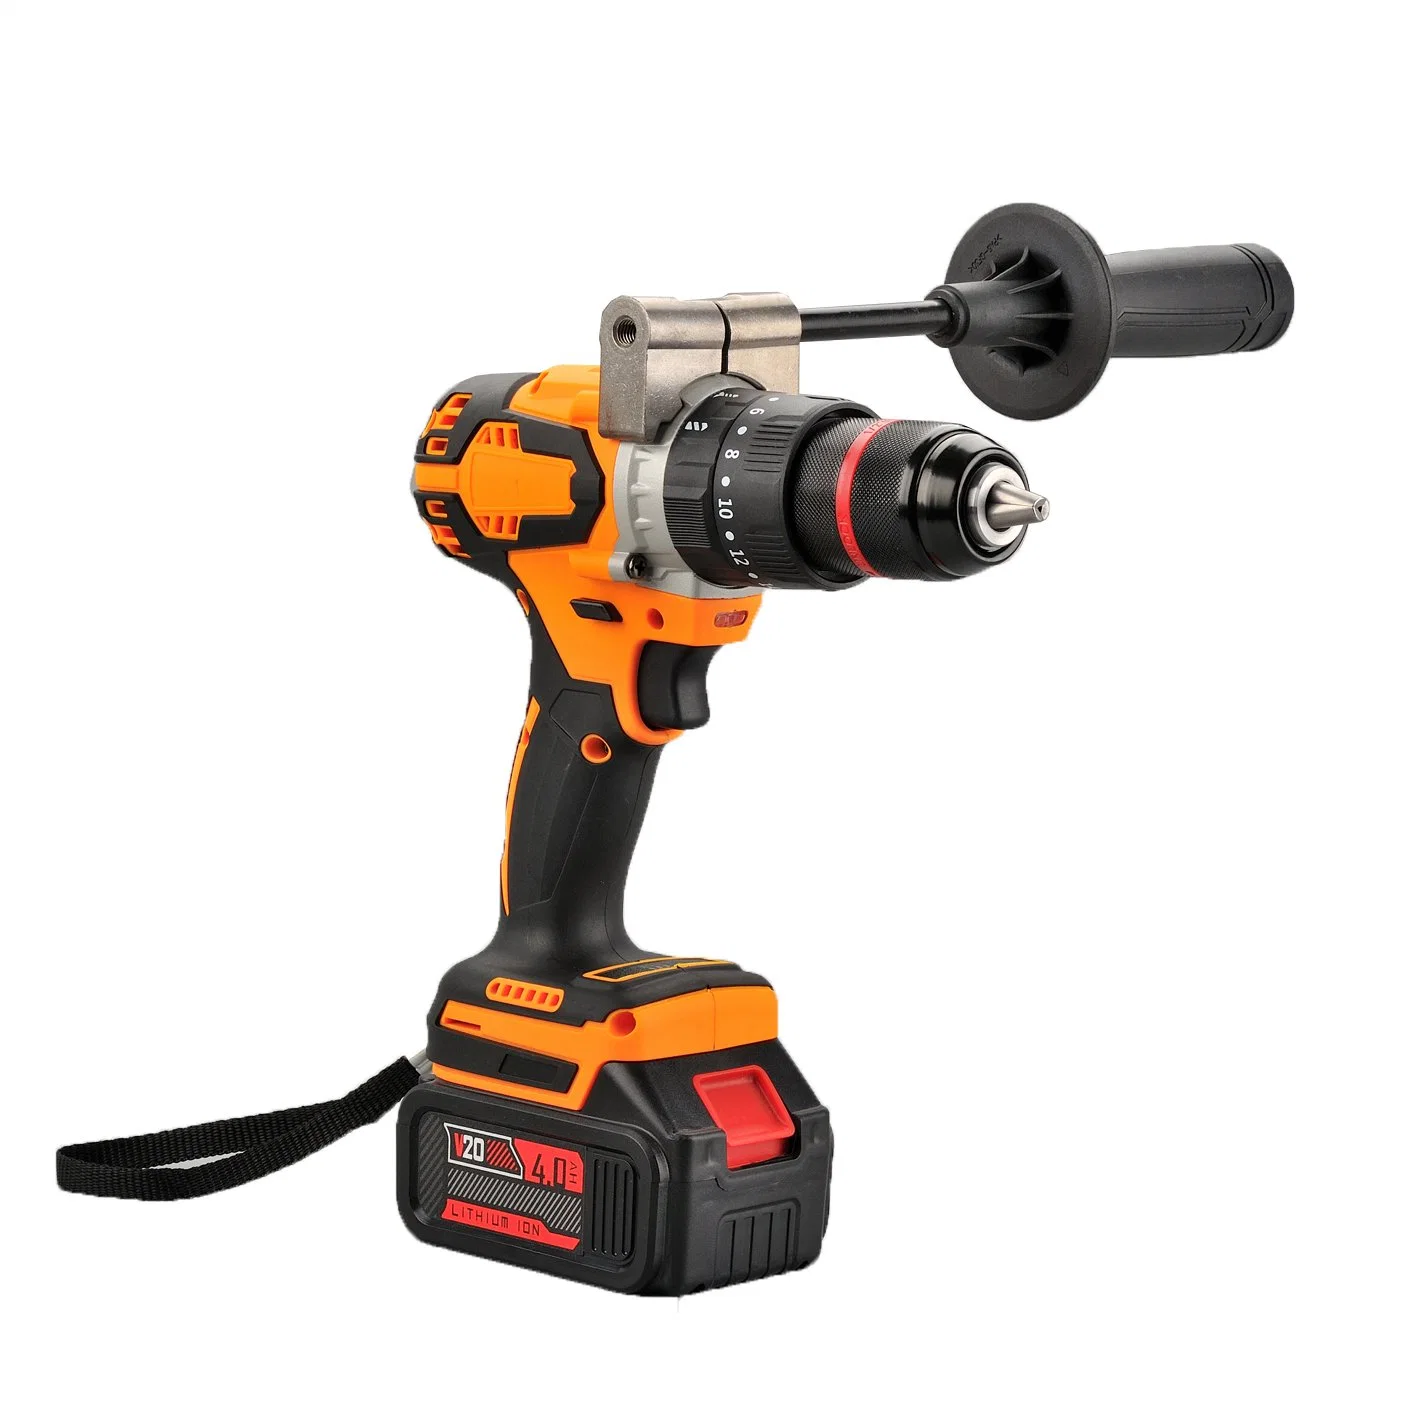 Construction Hardware Tools Portable 21V Battery Electrical Cordless Impact Drill Apt Tools Suppliers